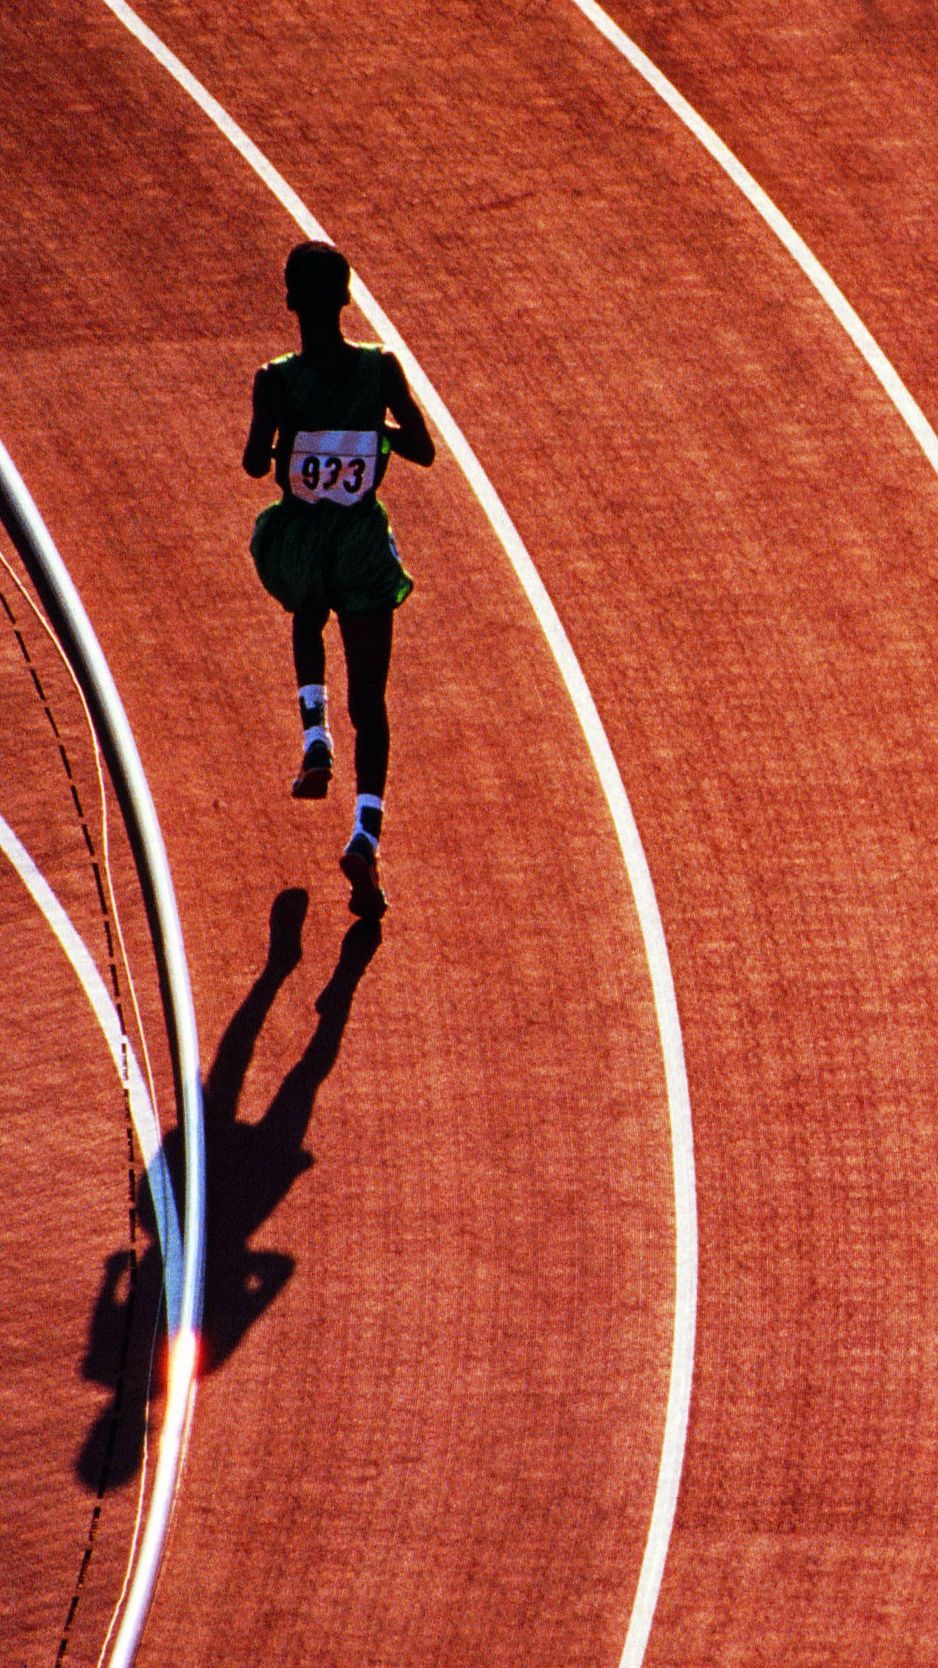 Download wallpaper 938x1668 sports, running, track iphone 8/7/6s/6 for  parallax hd background